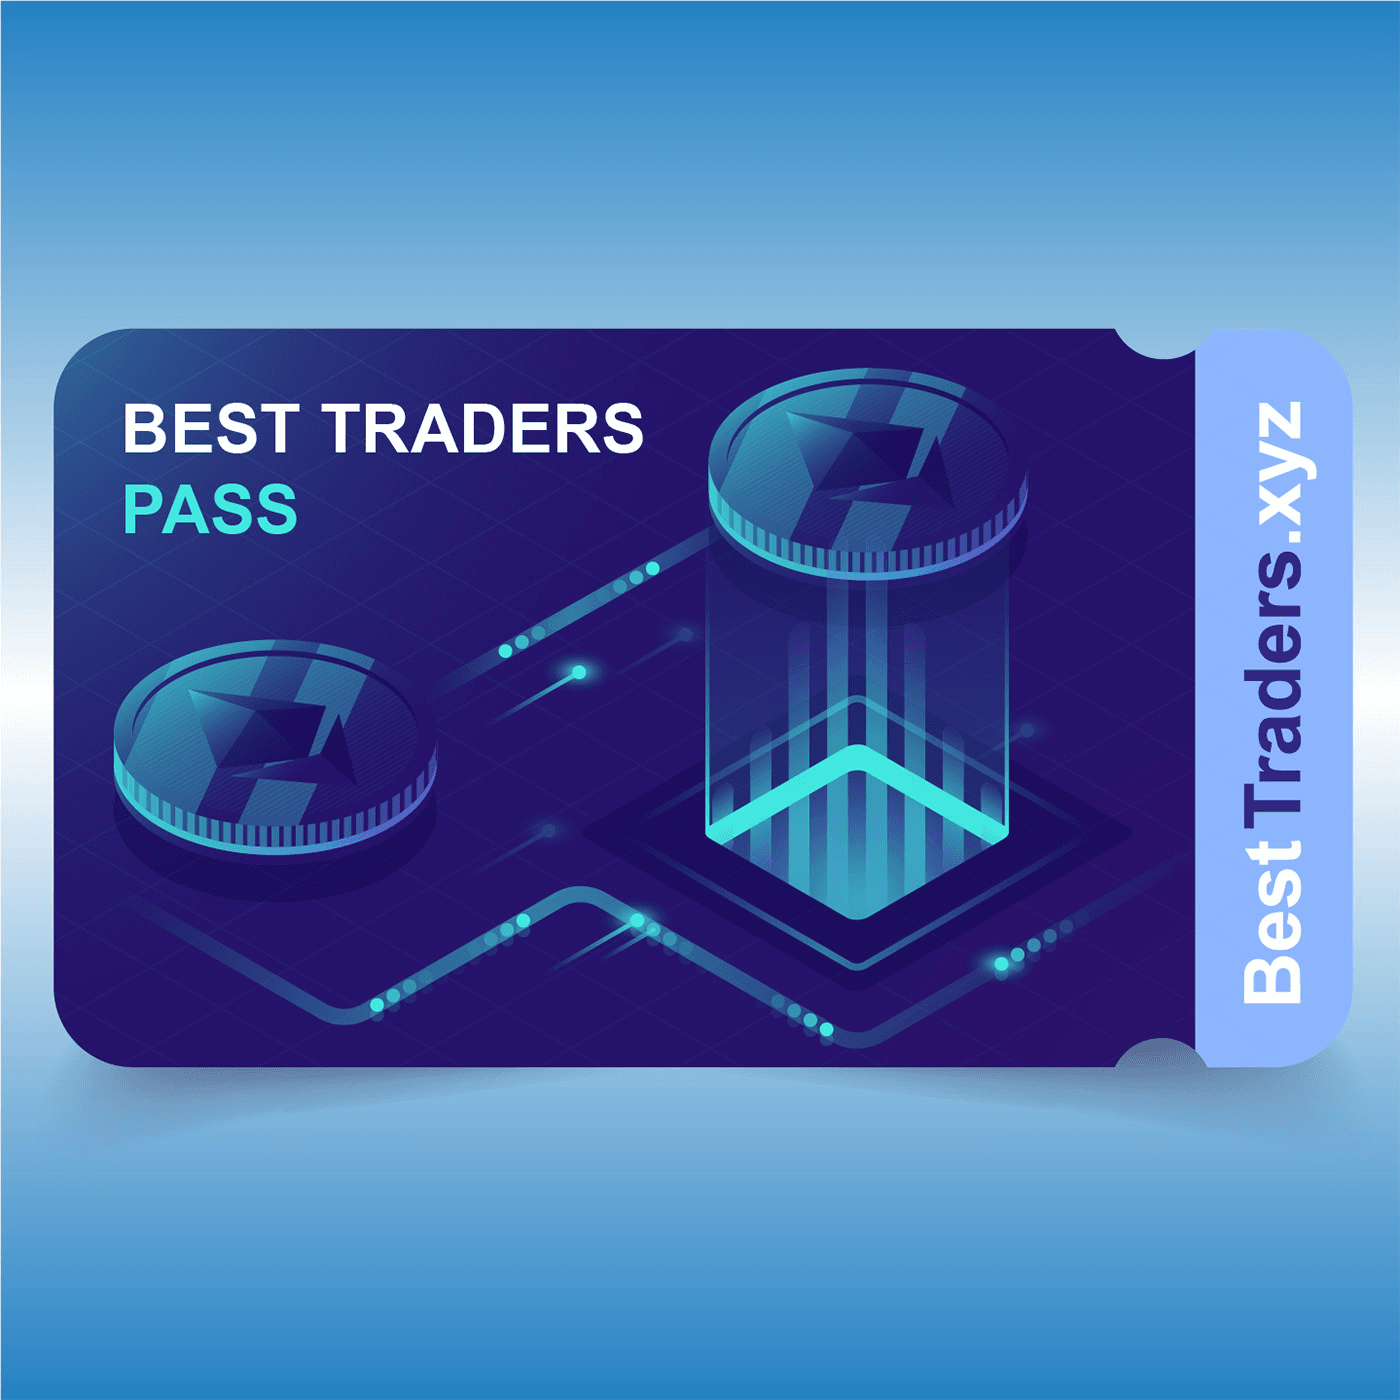 Best Traders Pass